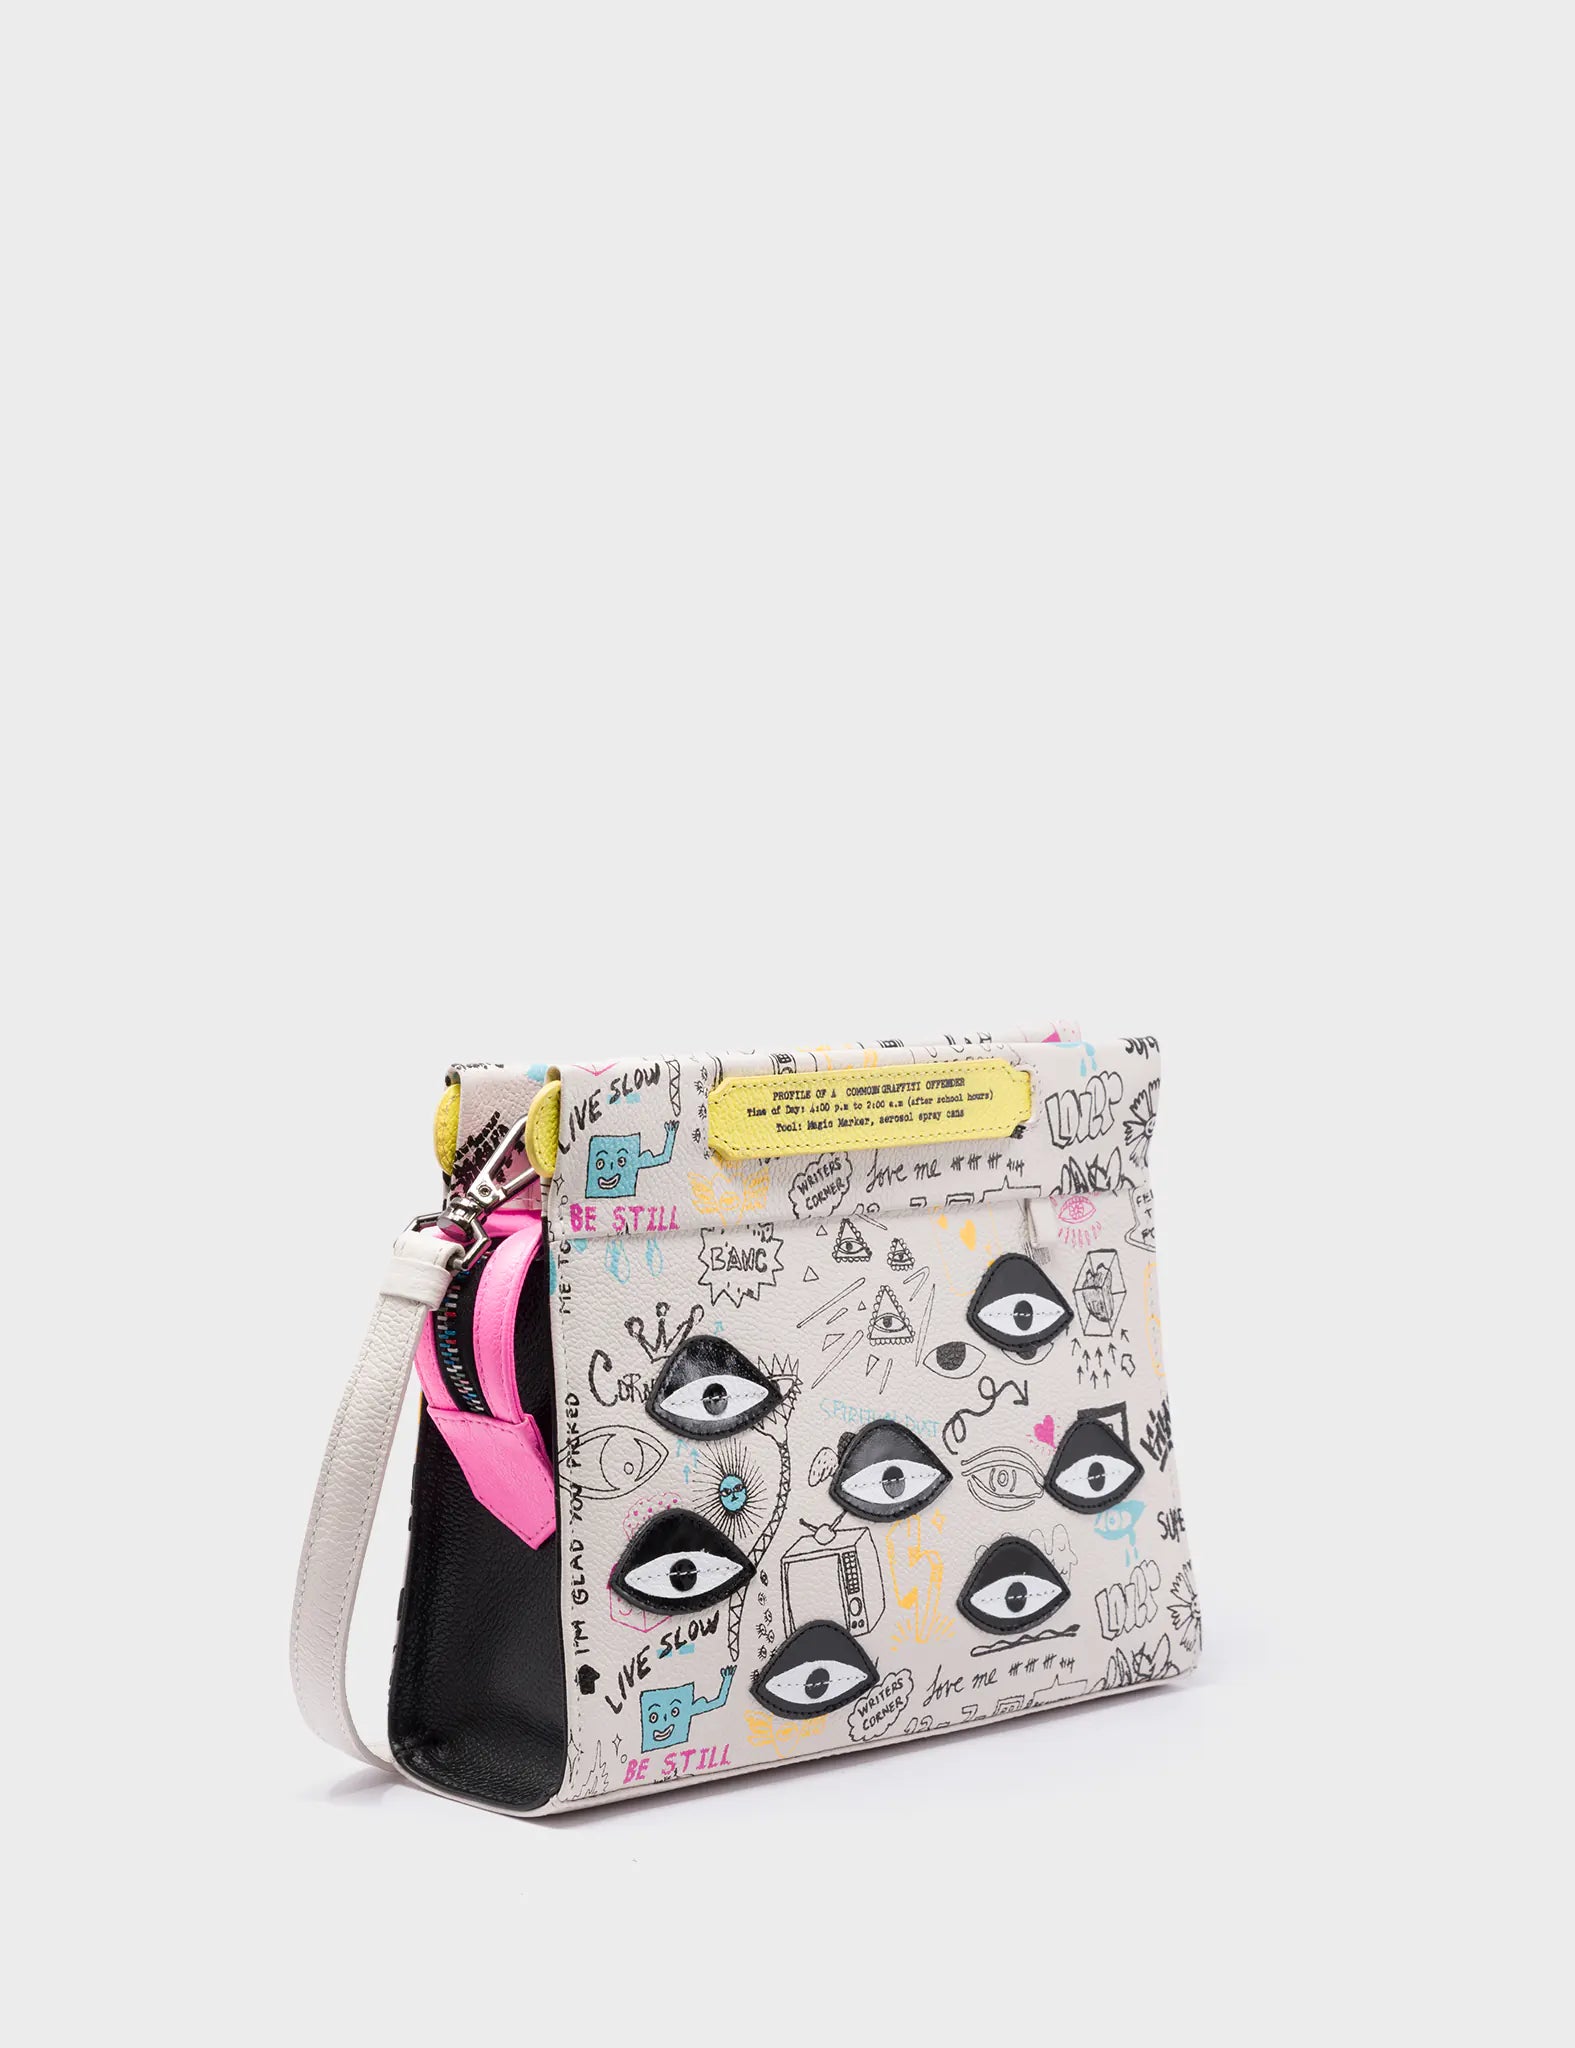 Vali Crossbody Small Cream Leather Bag - Urban Doodles Print and Eyes Applique - Main view